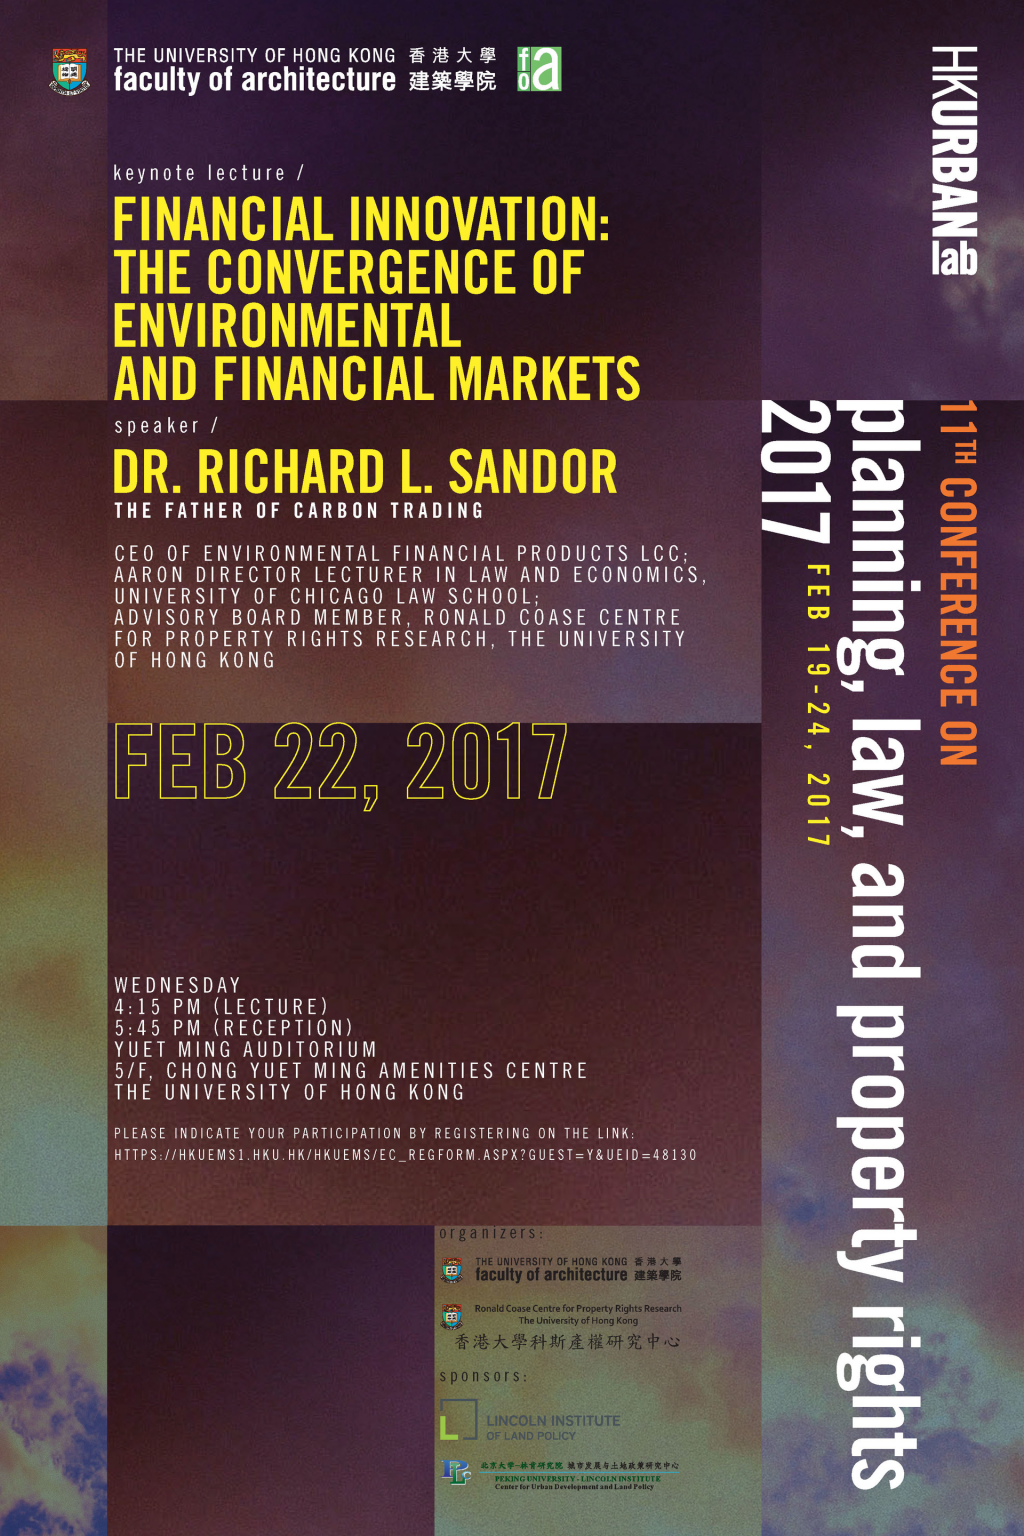 Financial Innovation: The Convergence of Environmental and Finanical Markets by Dr. Richard L Sandor